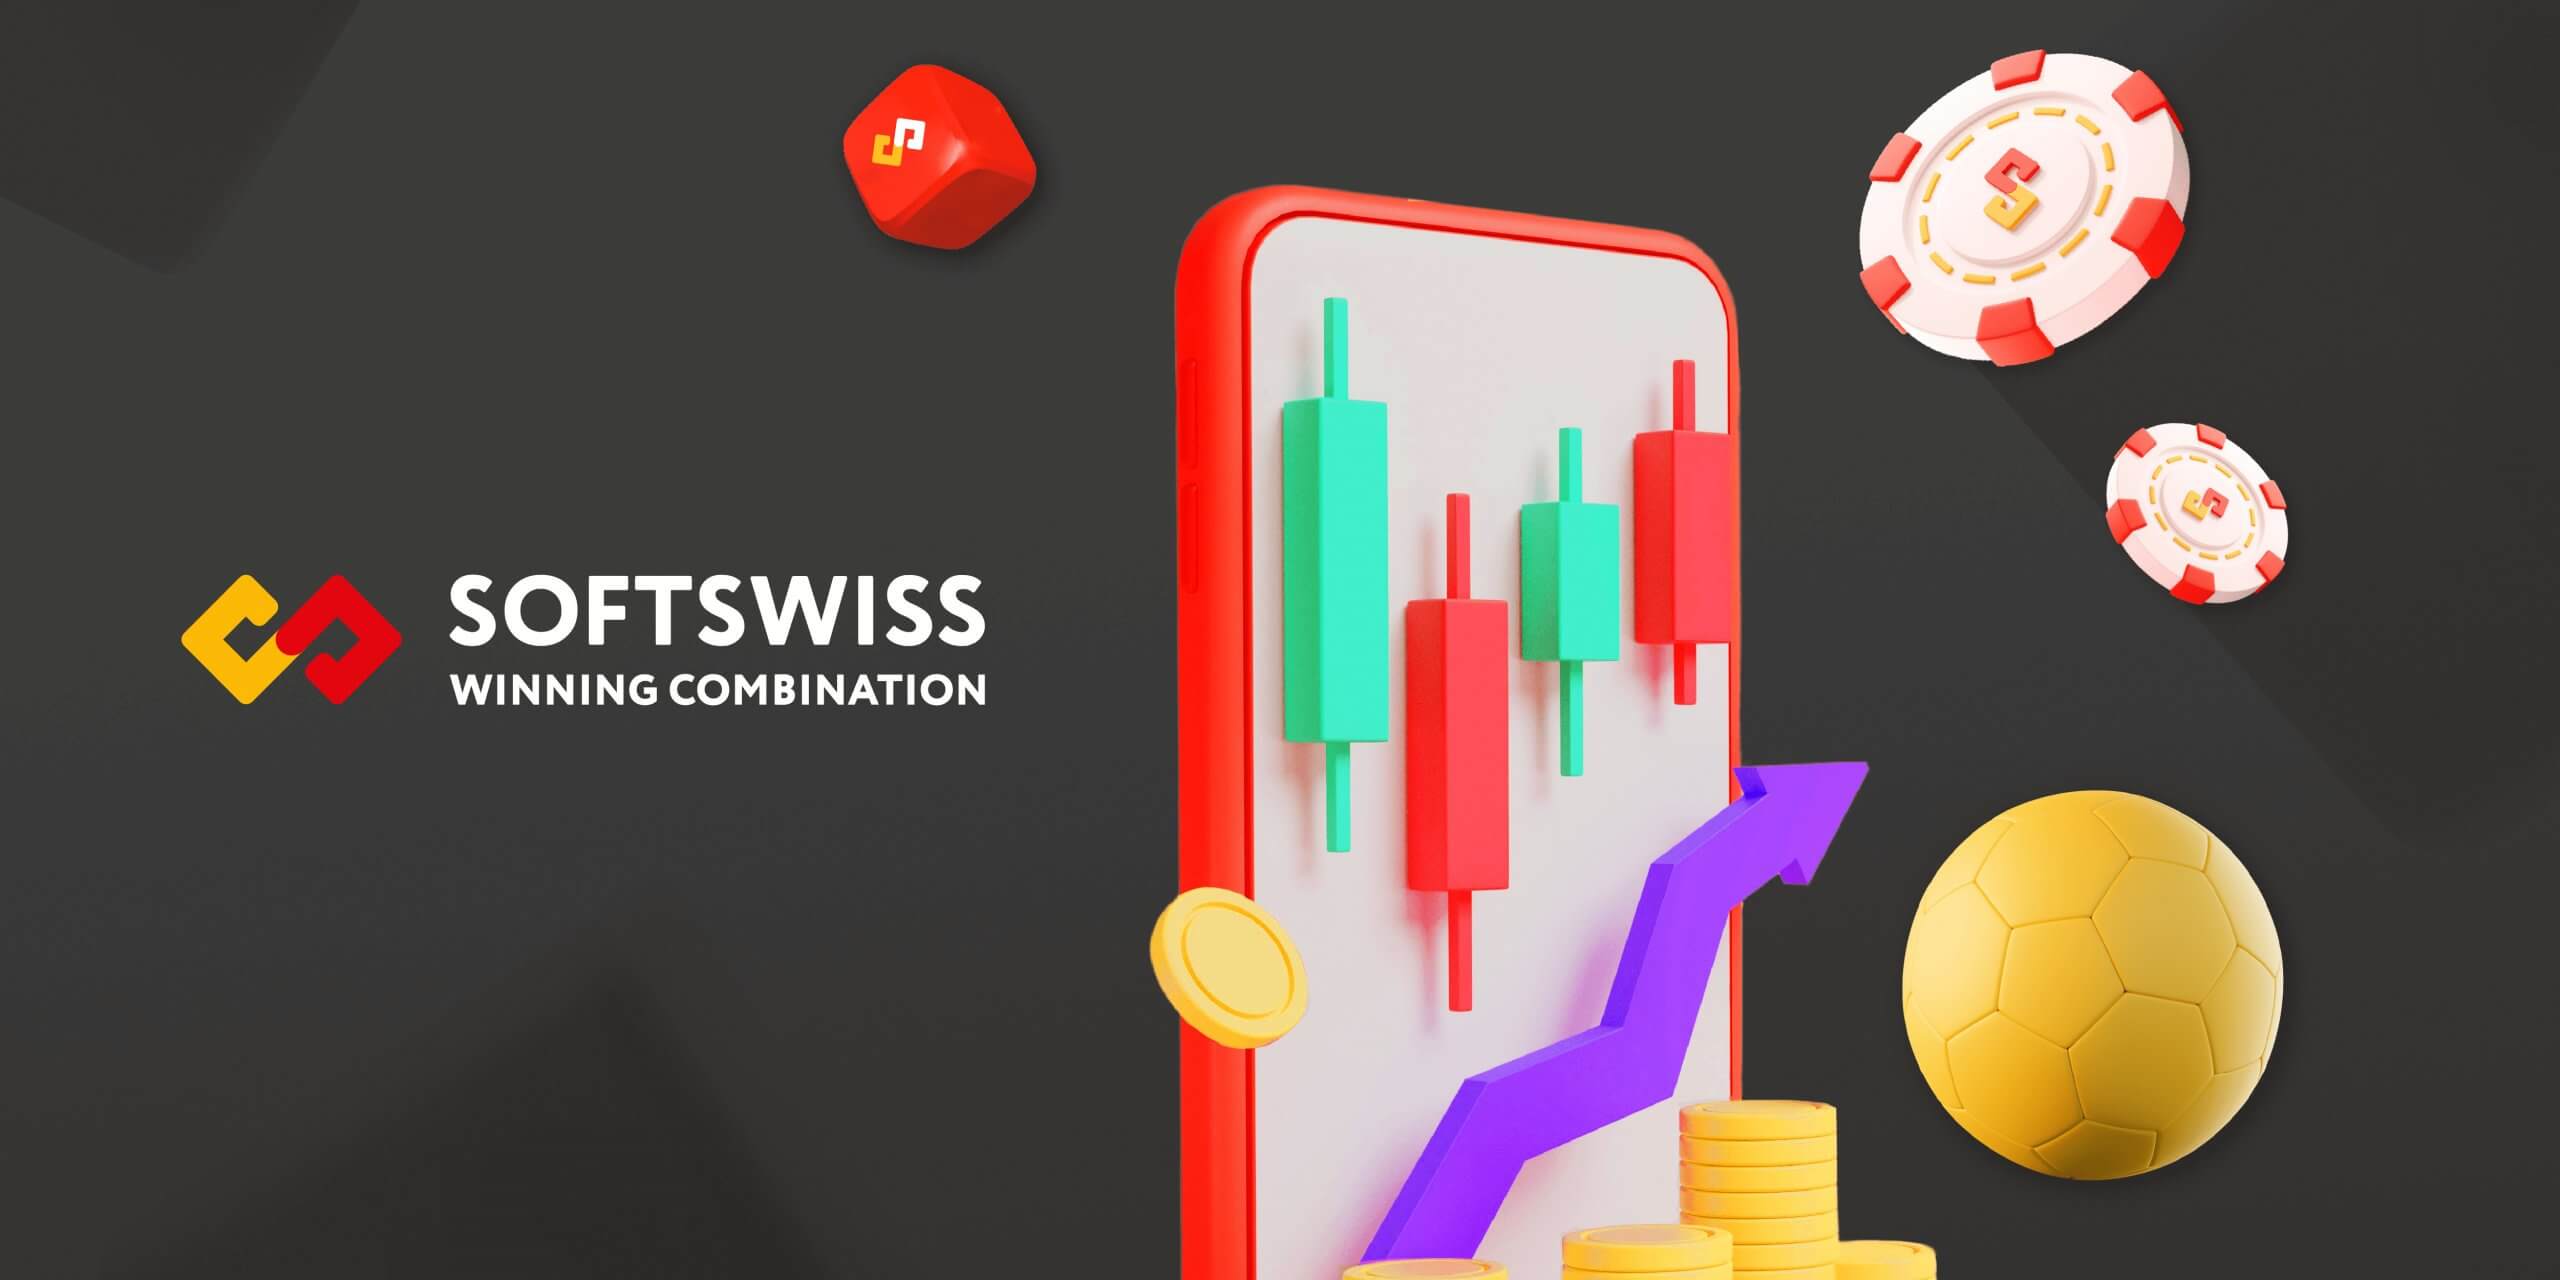 What are the Hottest iGaming Trends for 2023? SOFTSWISS shares expert industry report